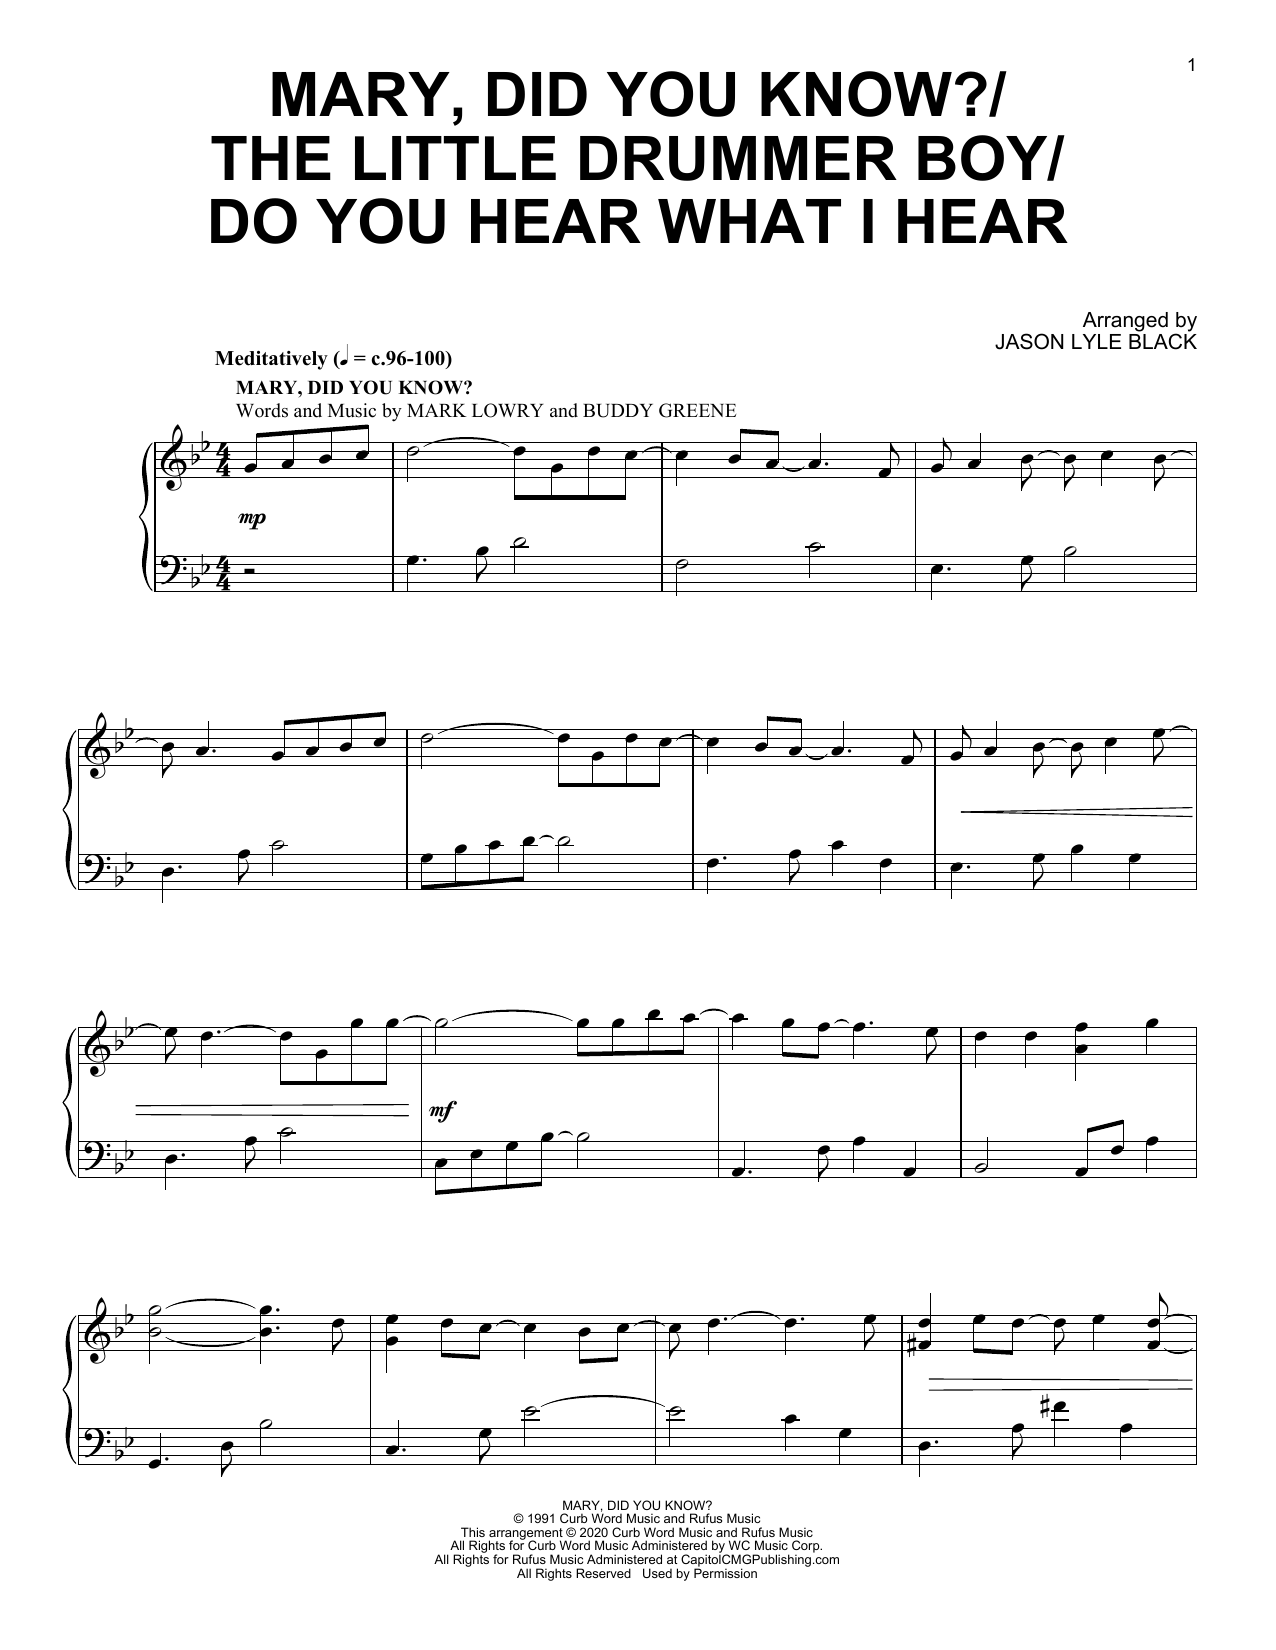 Download Jason Lyle Black Mary, Did You Know?/The Little Drummer Sheet Music